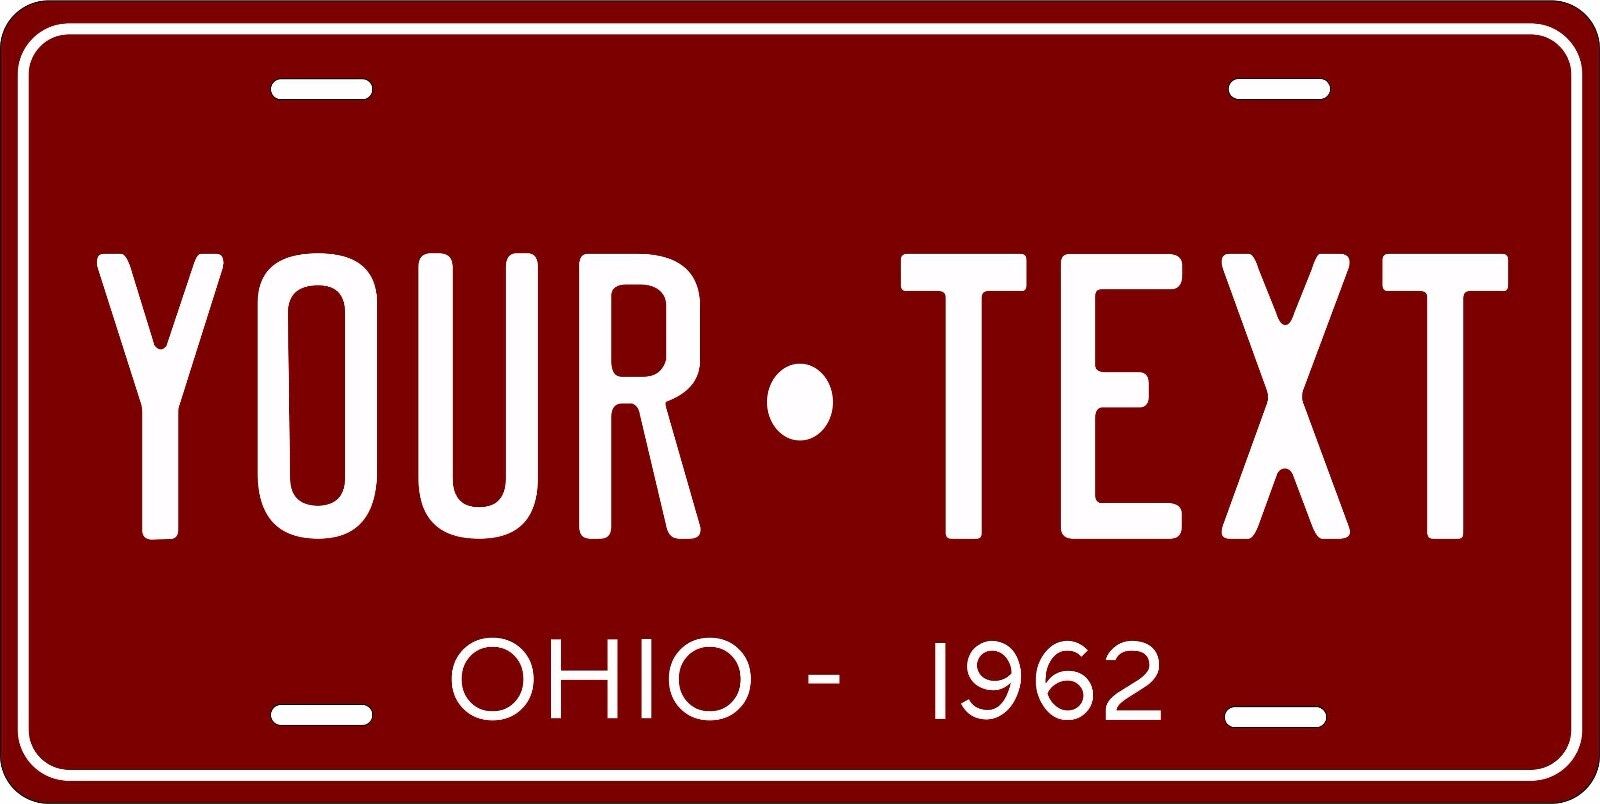 Ohio 1962 License Plate Personalized Custom Car Auto Bike Motorcycle Moped